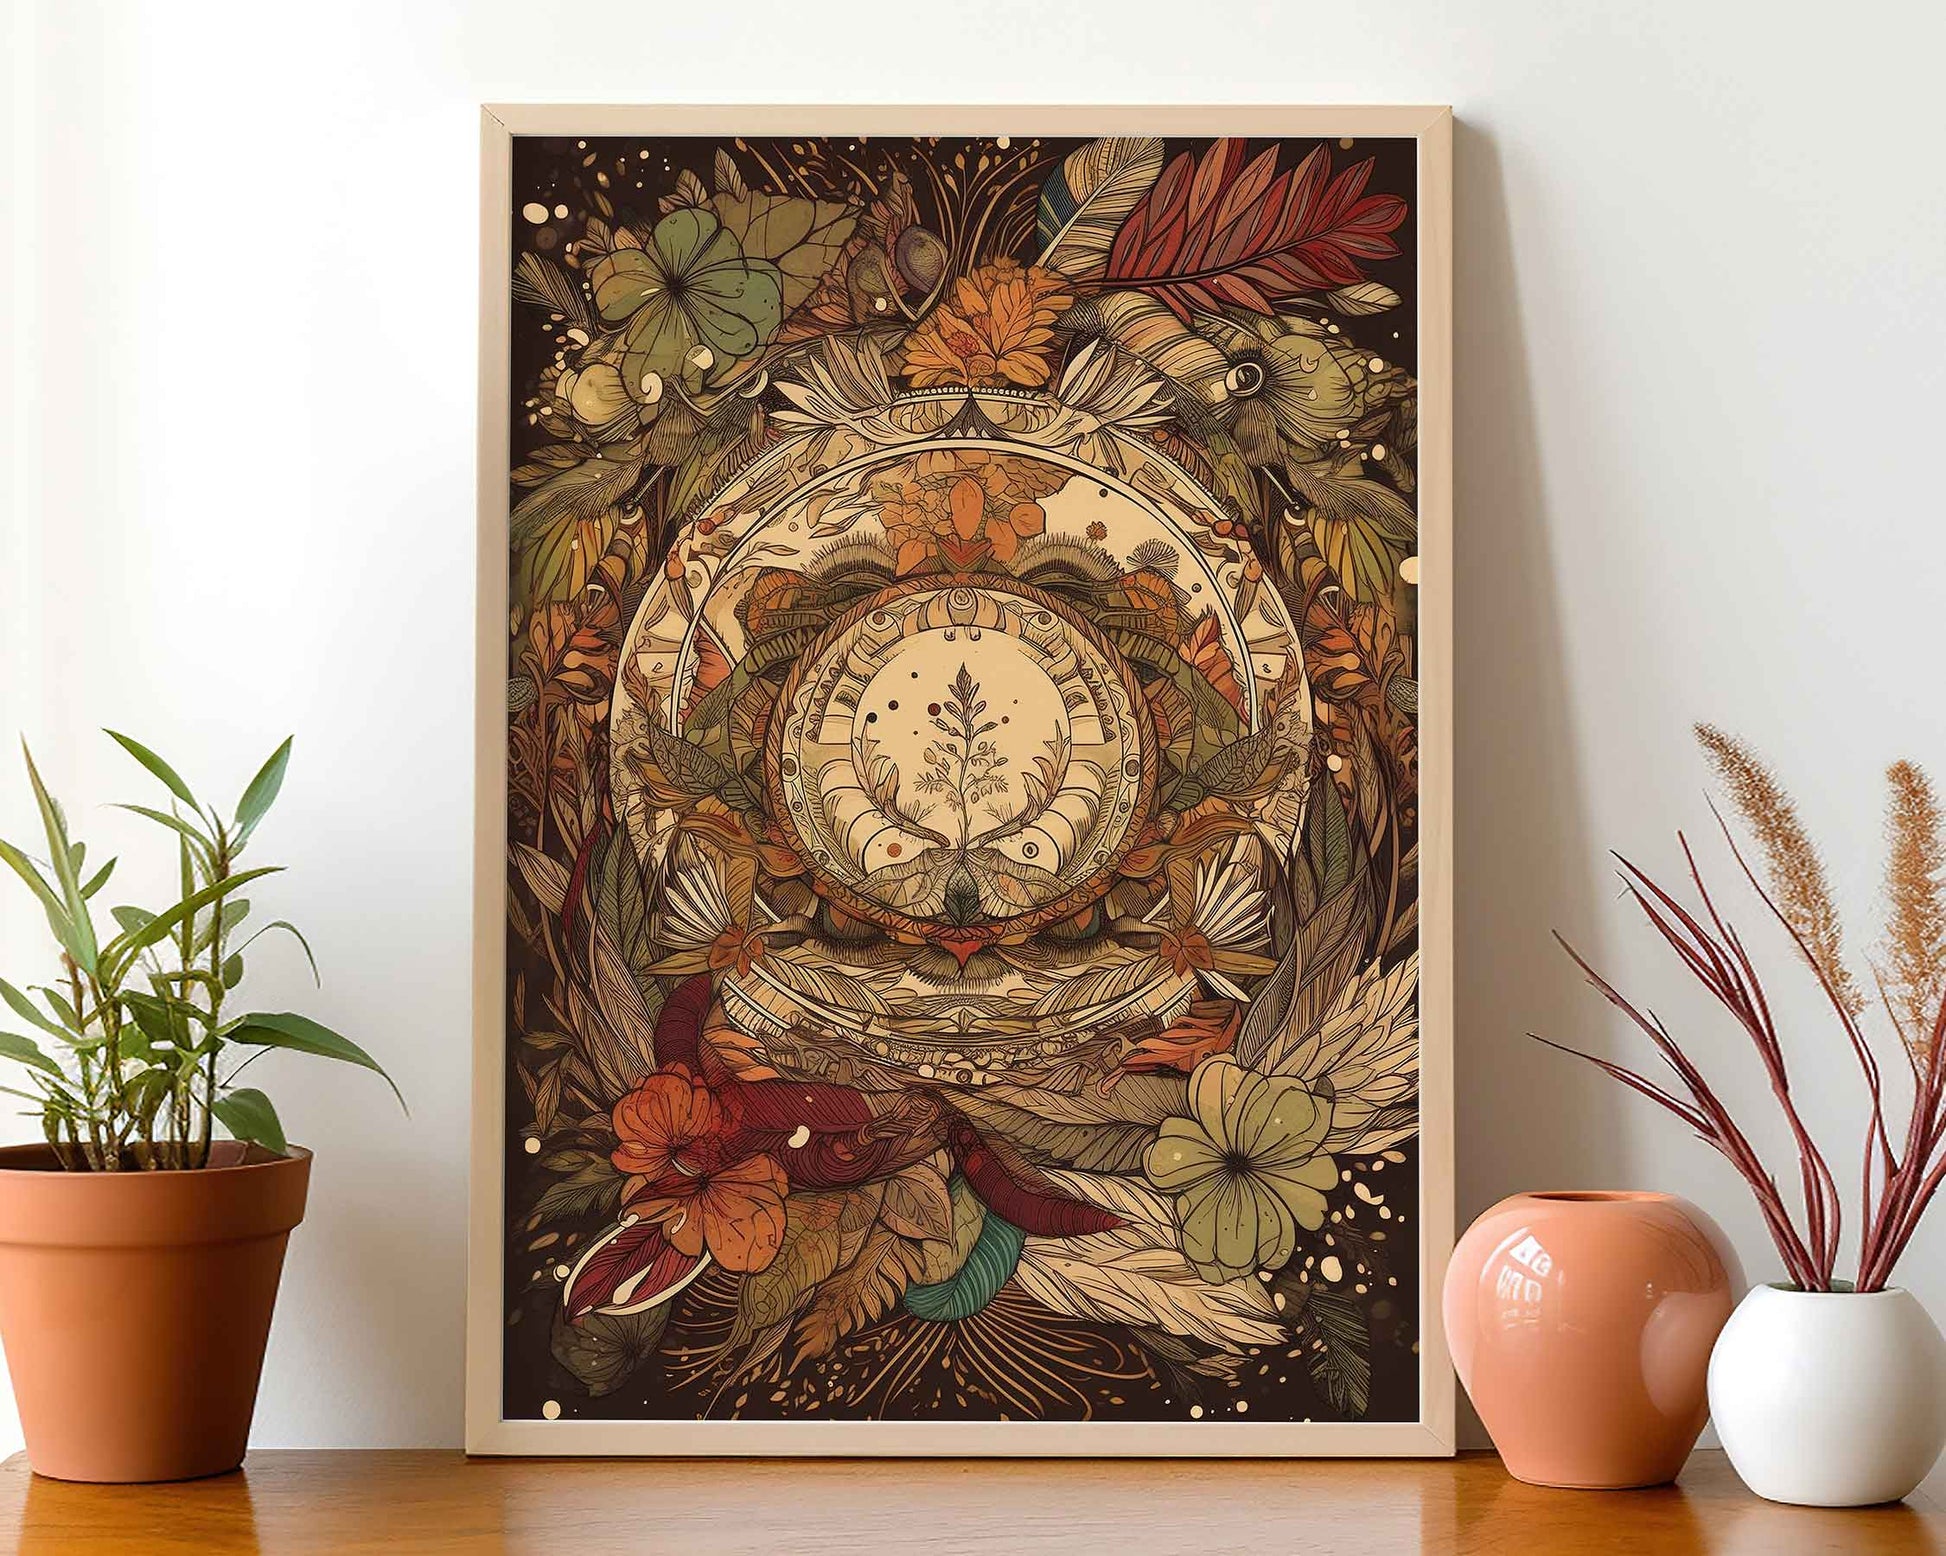 Framed Image of Mandala Boho Earth Tones Feathers and Flowers Wall Art Poster Prints